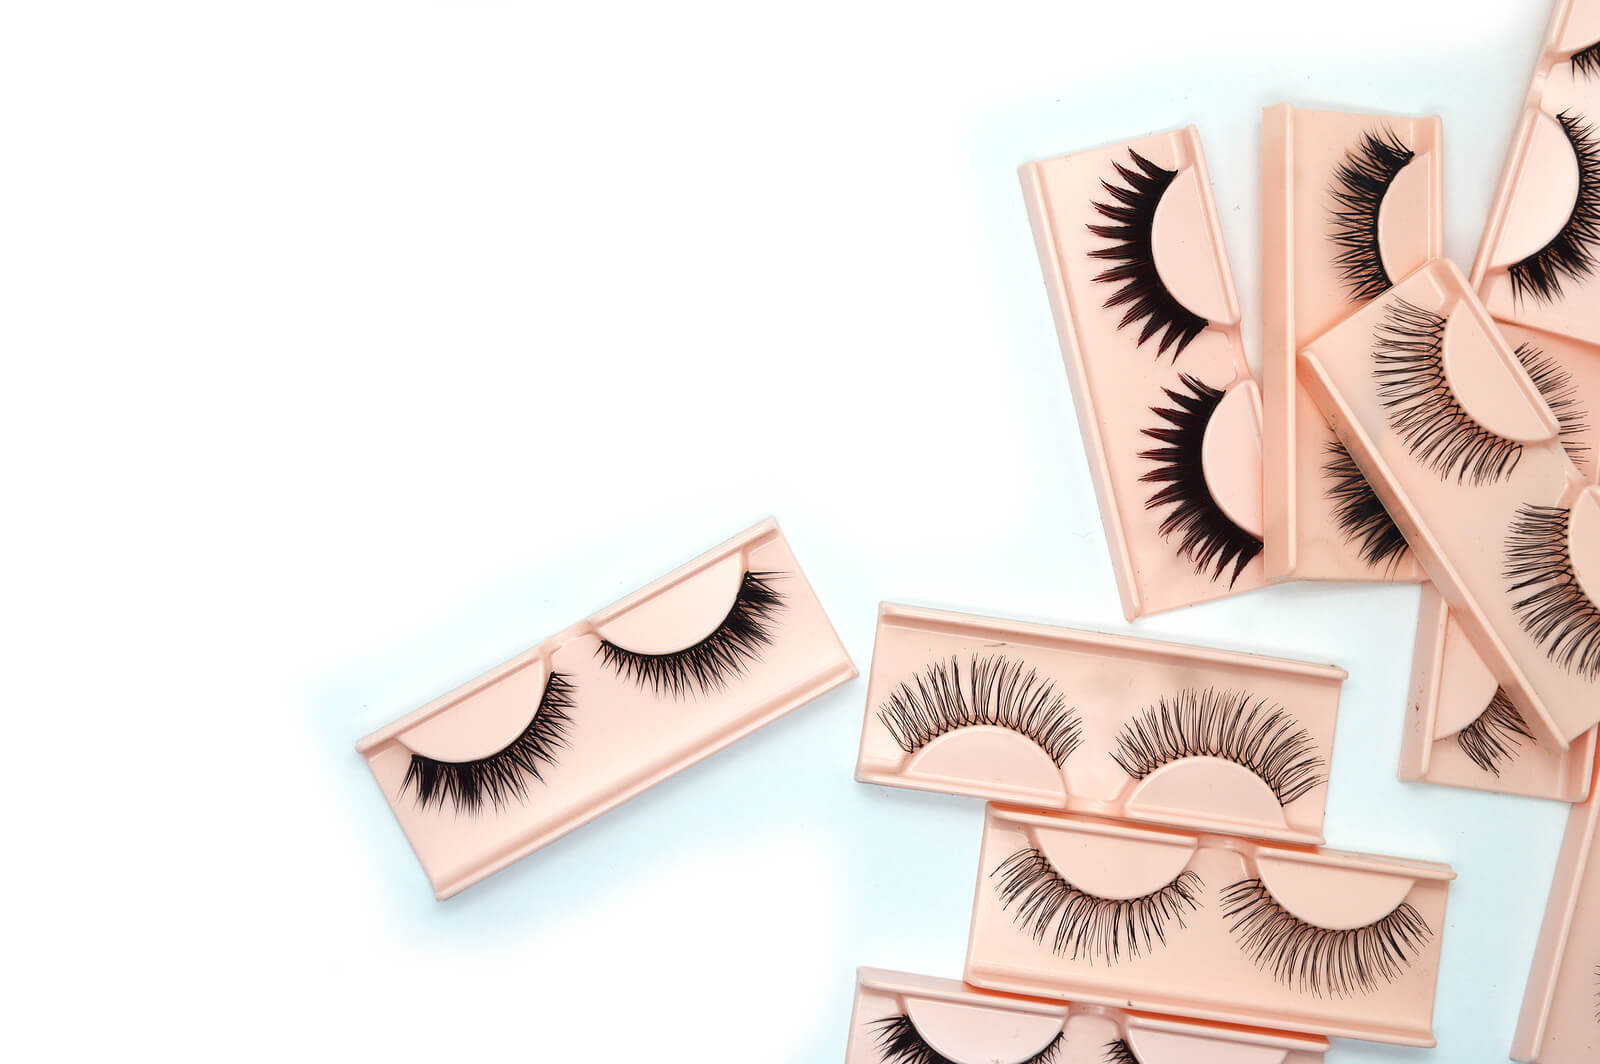 Strip lashes in their packaging.